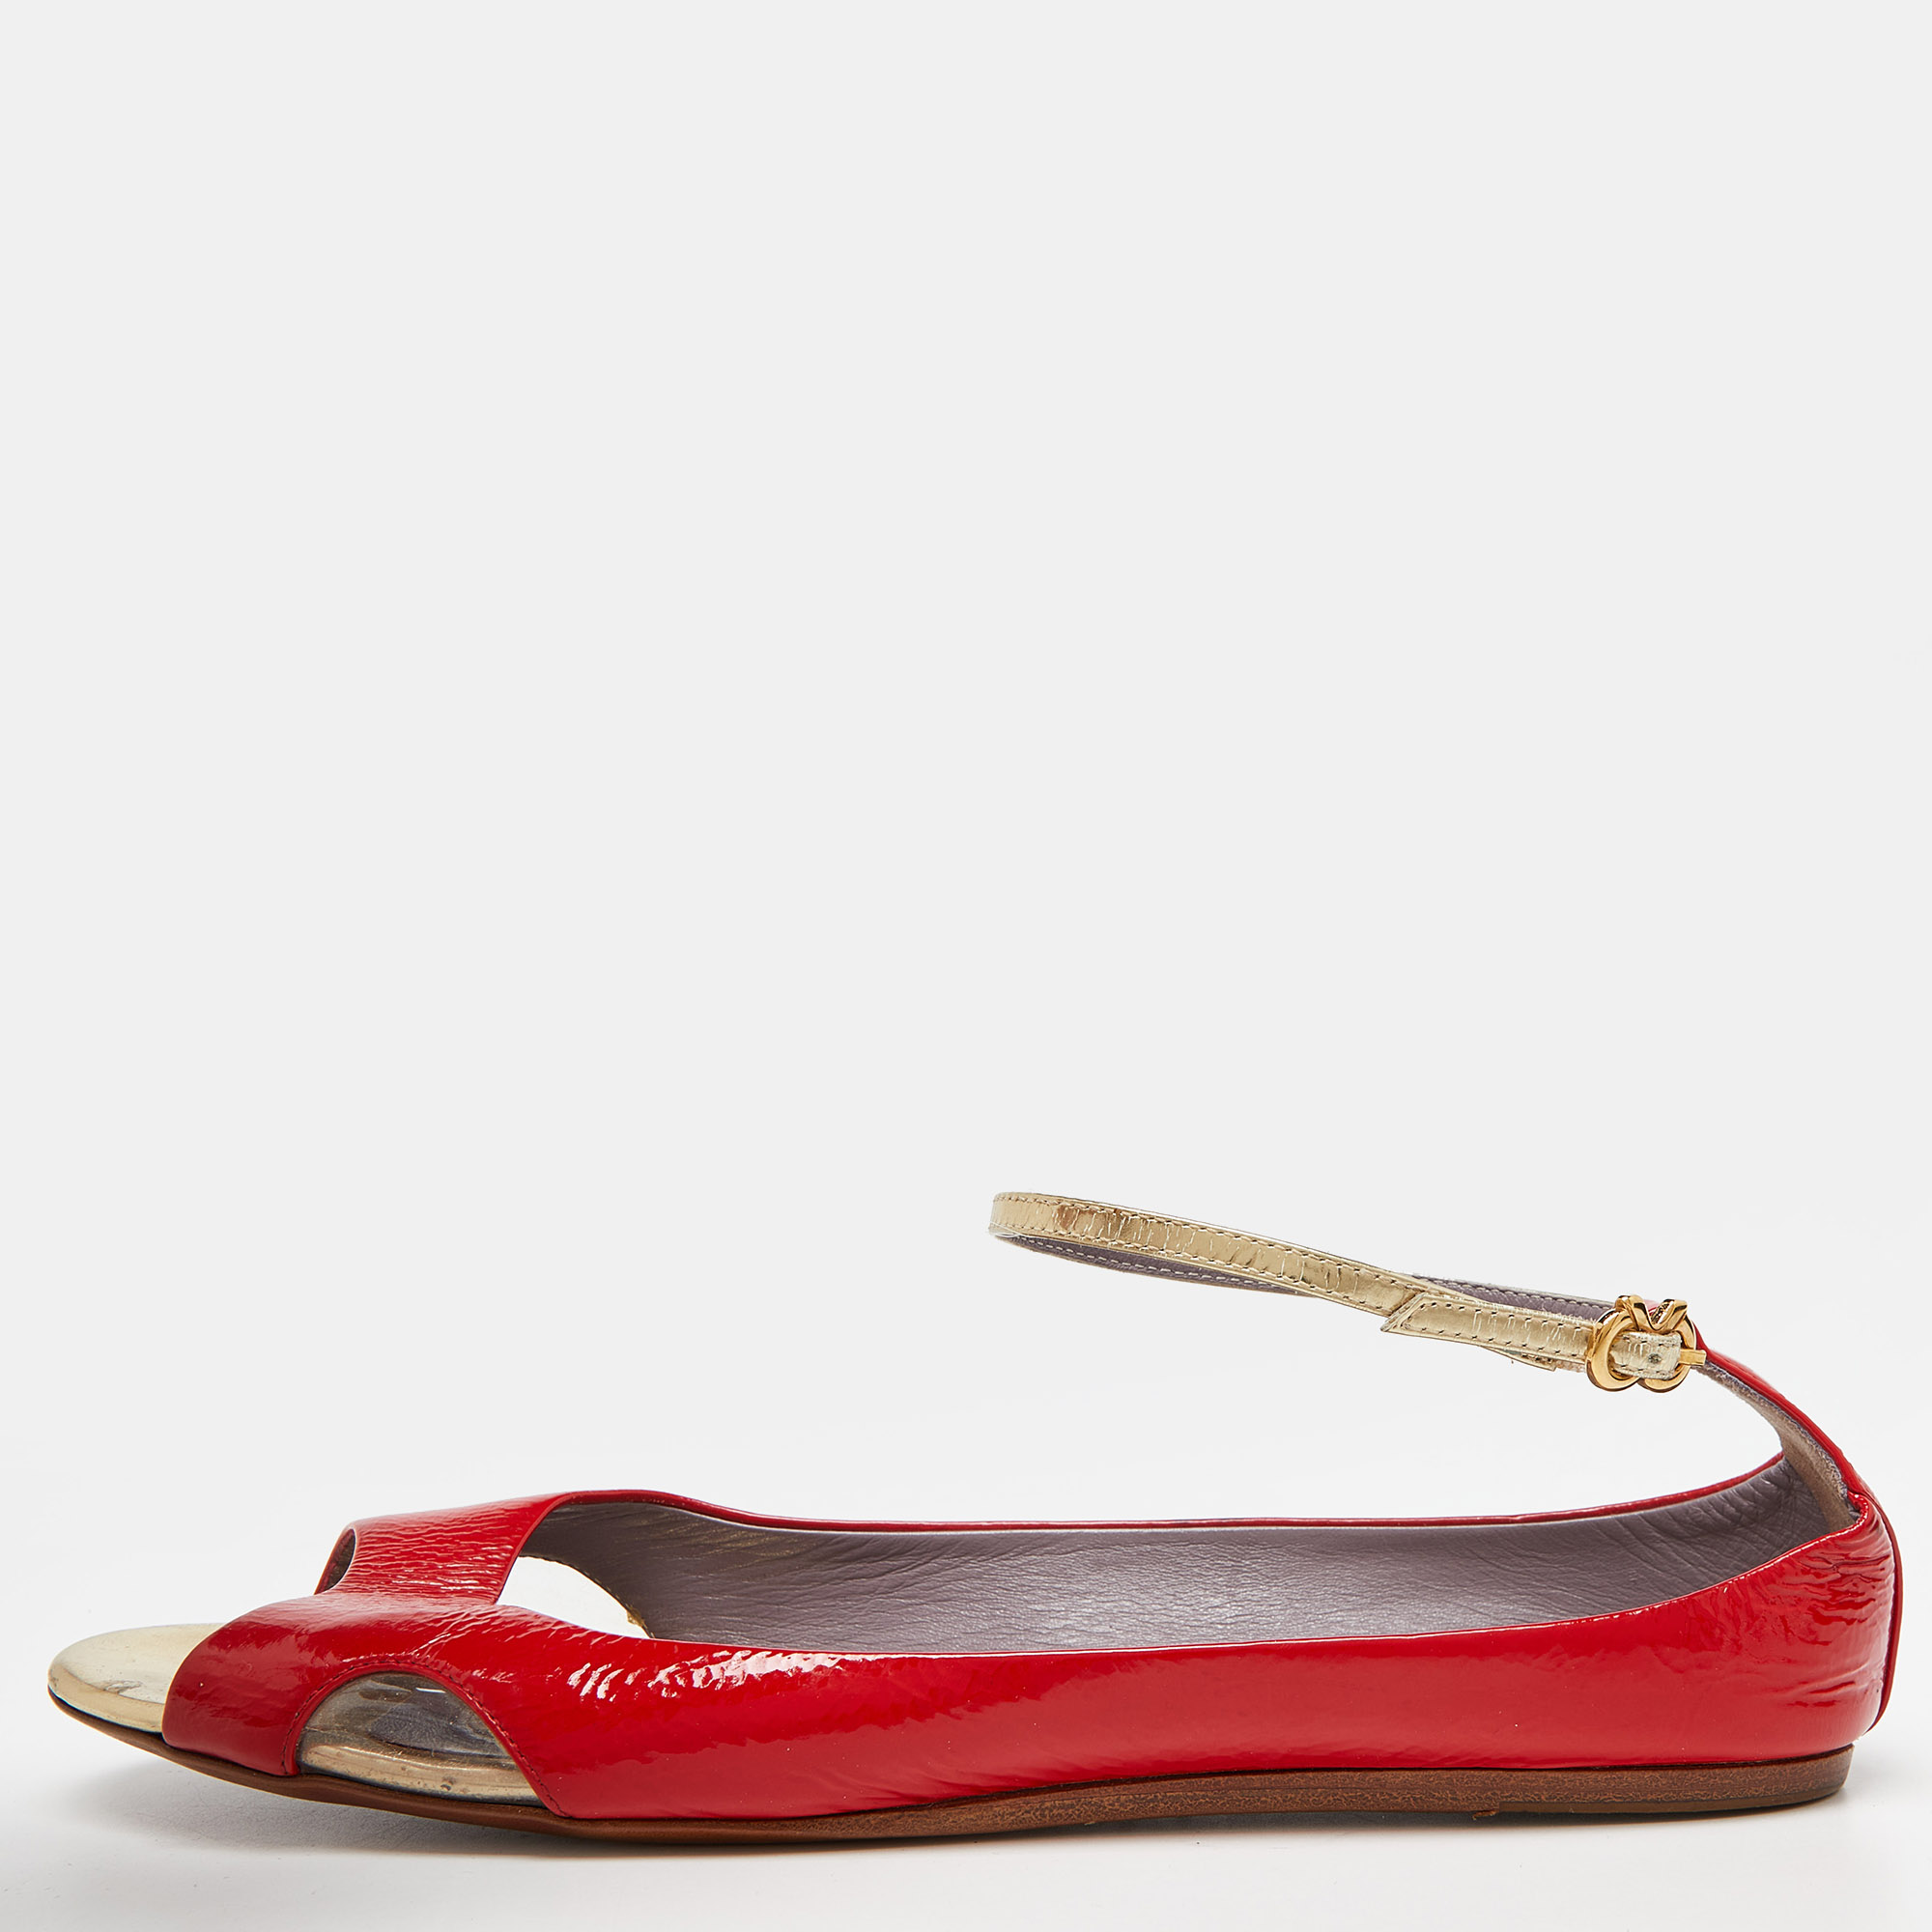 Pre-owned Anya Hindmarch Red Patent Leather Open Toe Ankle Strap Flats Size 39